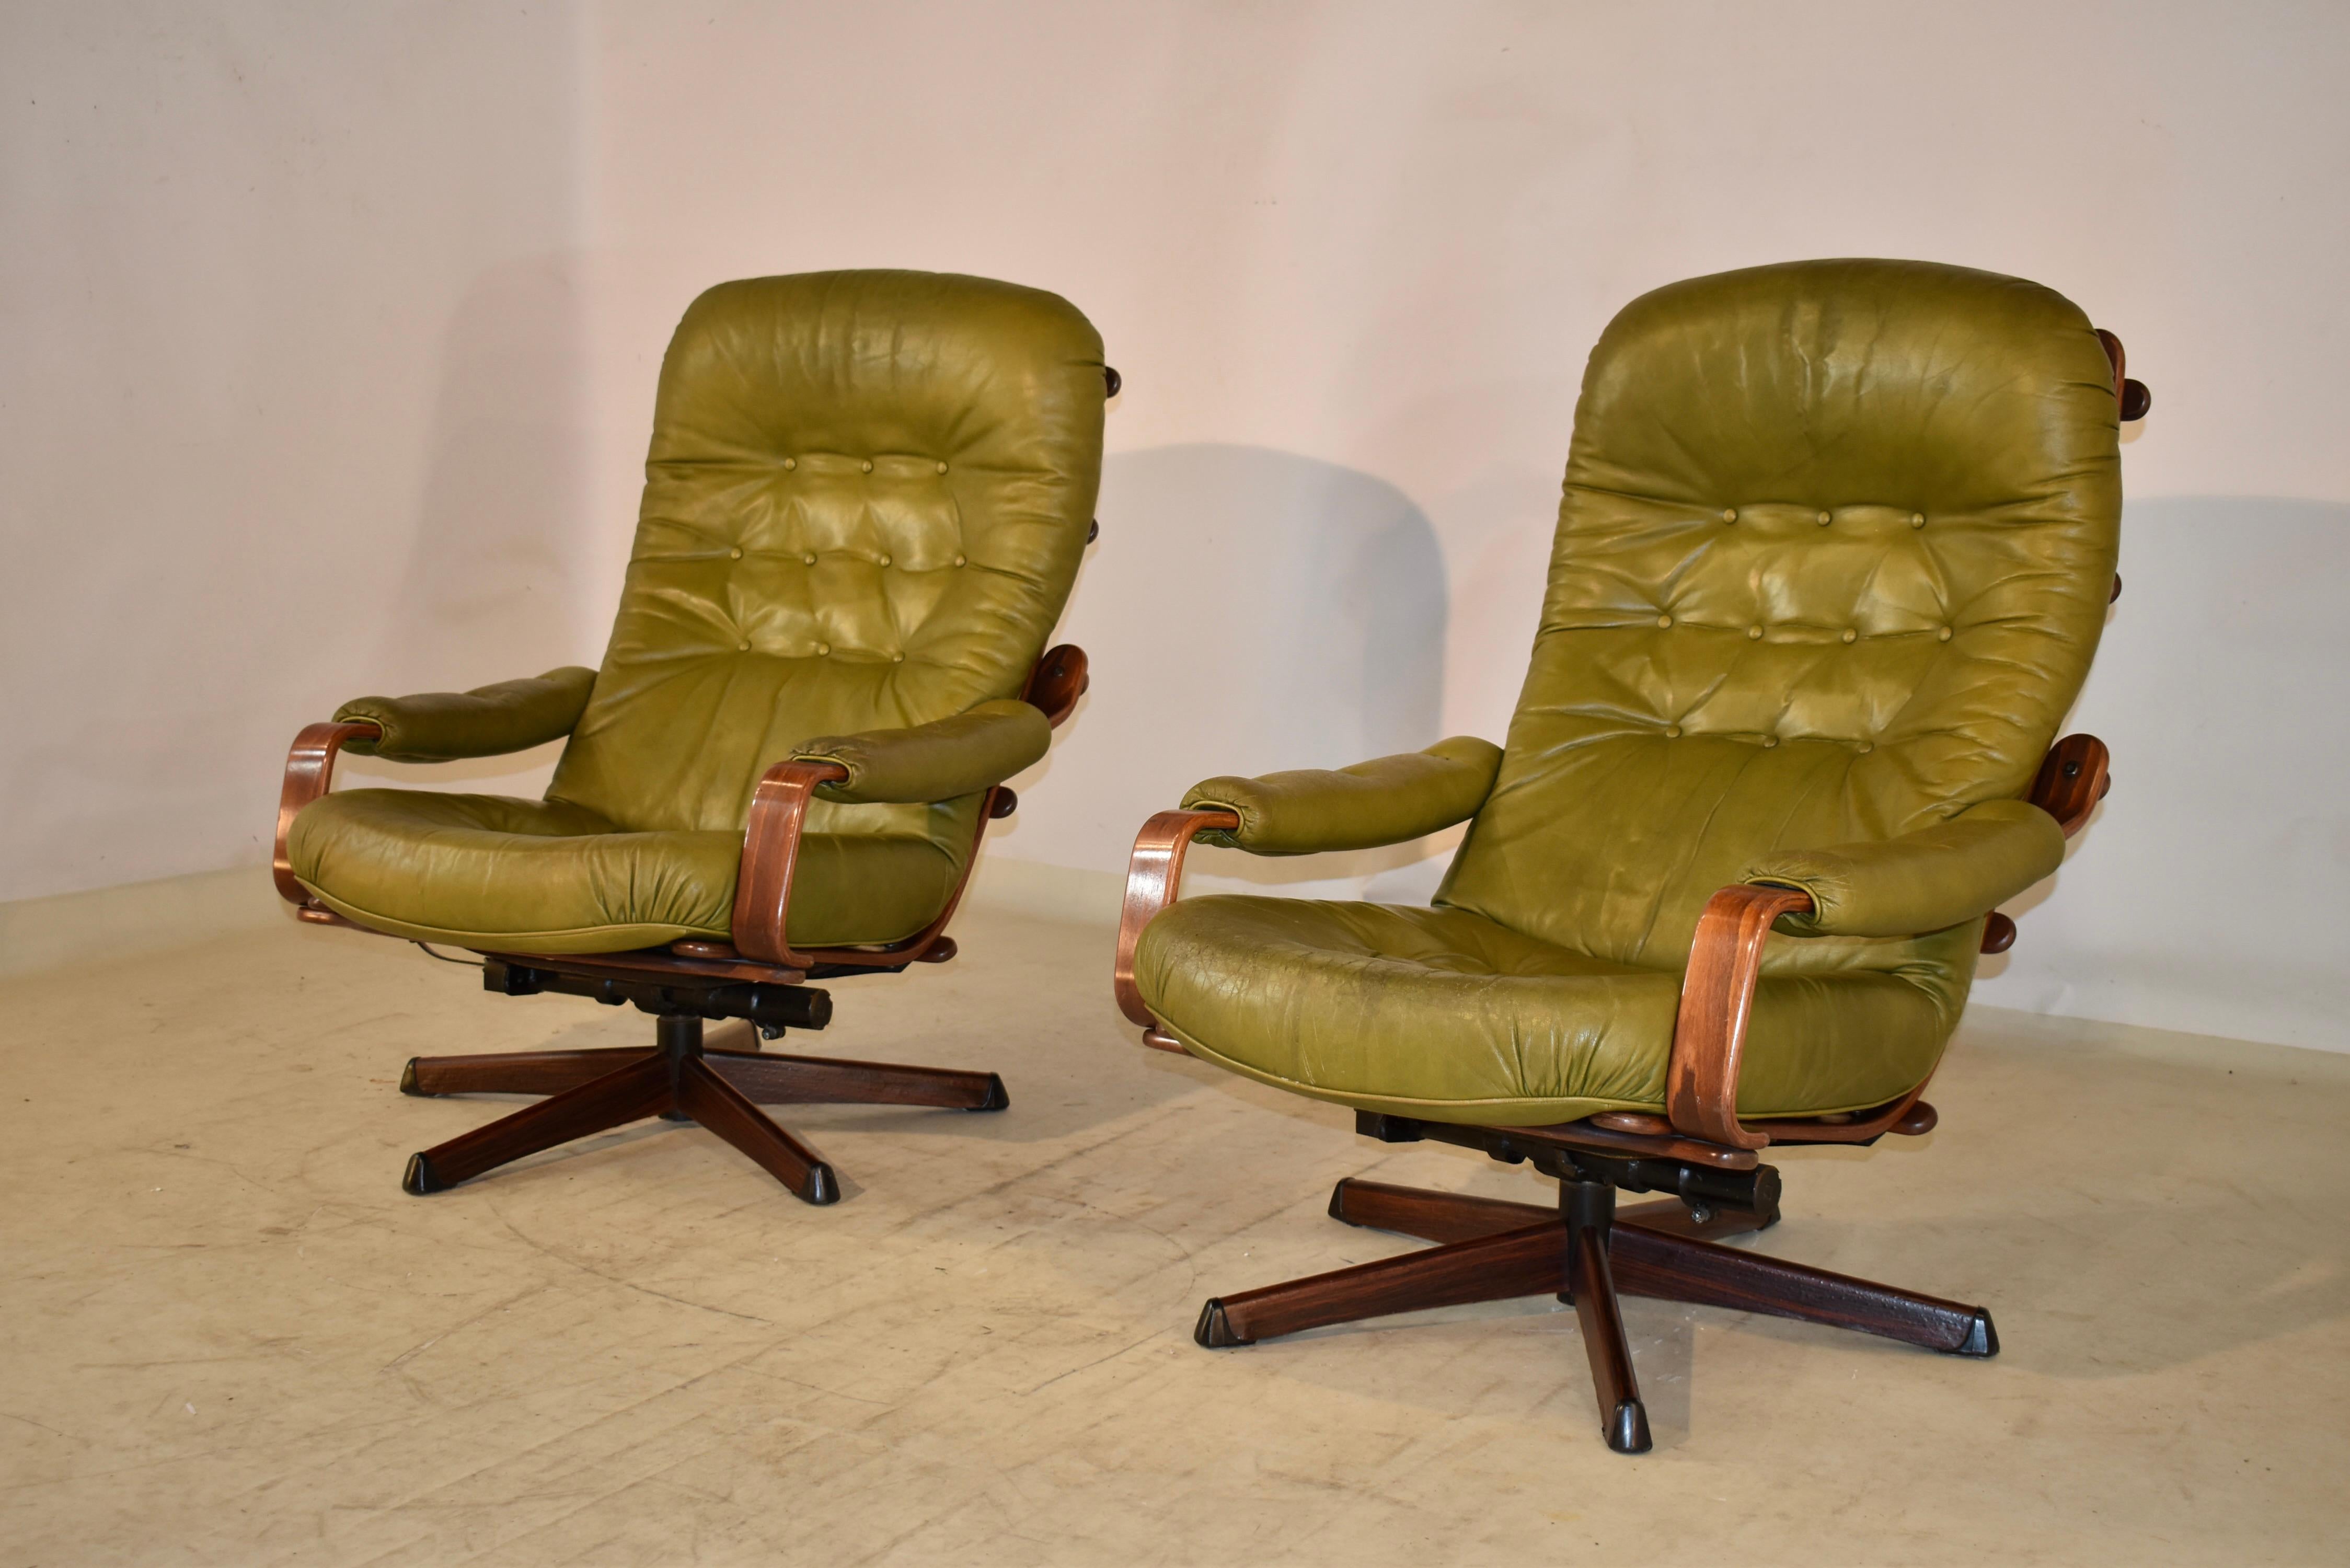 Scandinavian Modern Pair of Göte Mobler Mid-Century Leather Chairs, circa 1960s For Sale